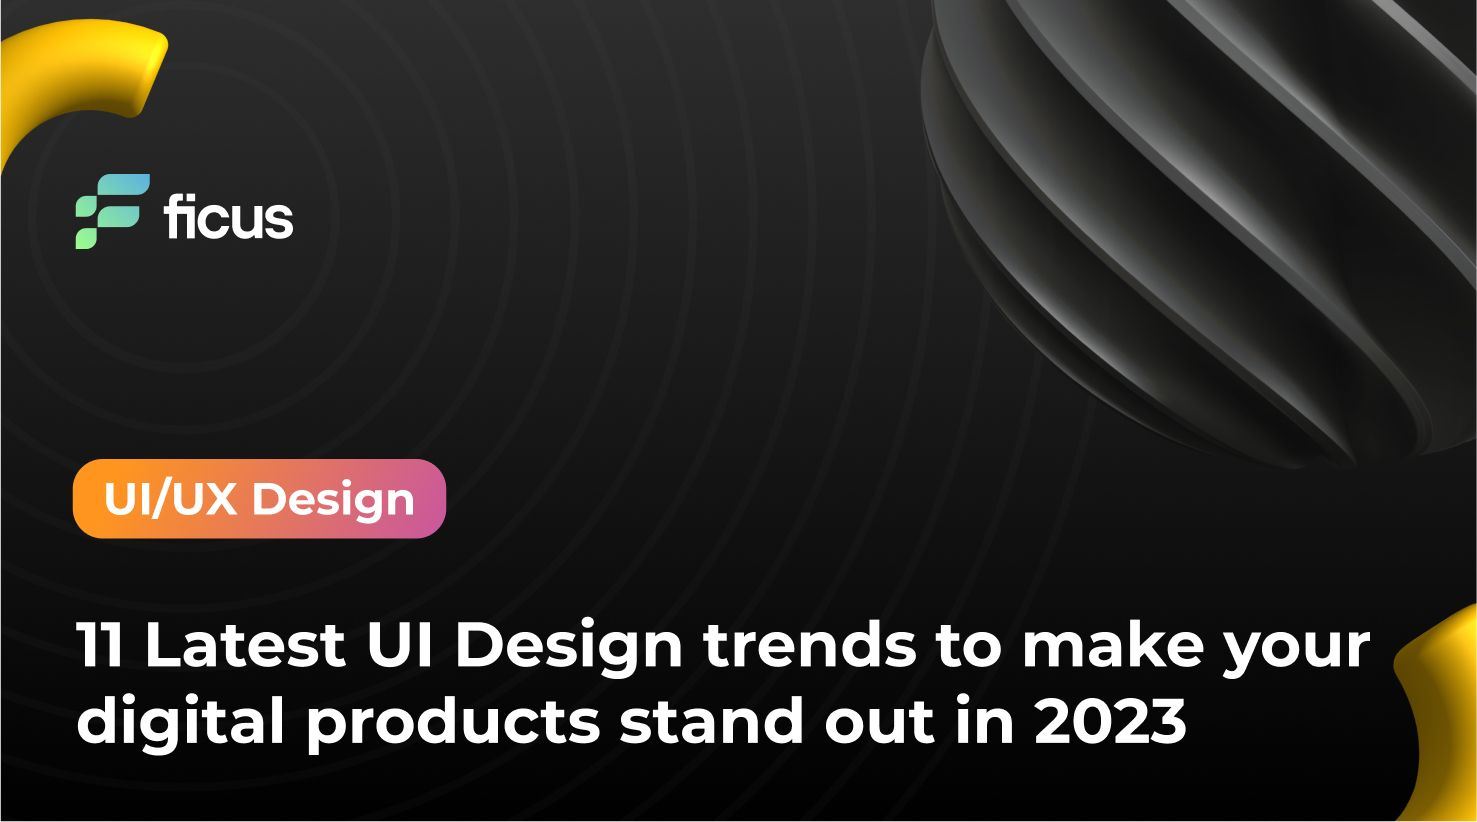 11 Latest UI Design Trends to Make Your Digital Products Stand Out in 2023